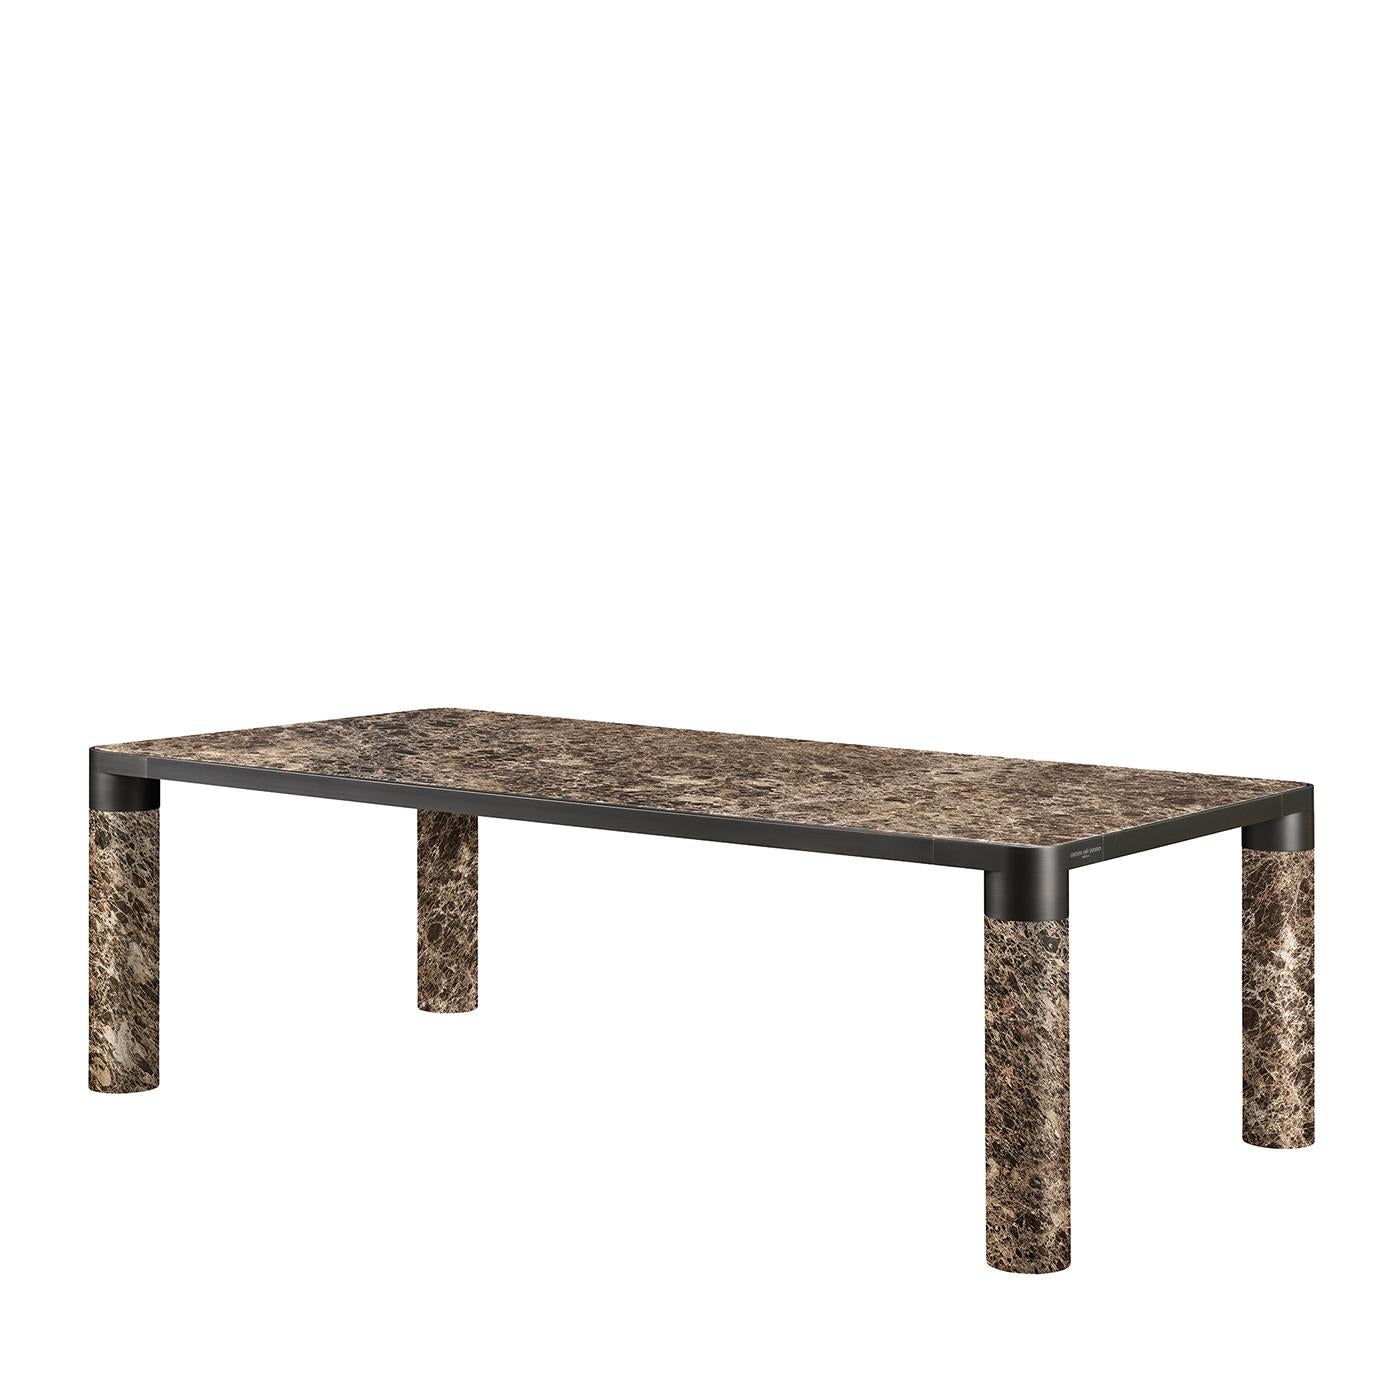 A statement piece that will infuse modern dining rooms with pure luxury, this dining table strikes with the minimalism of its clean lines and preciousness of prized brown marble, here offered in a version characterized by singular, intricate